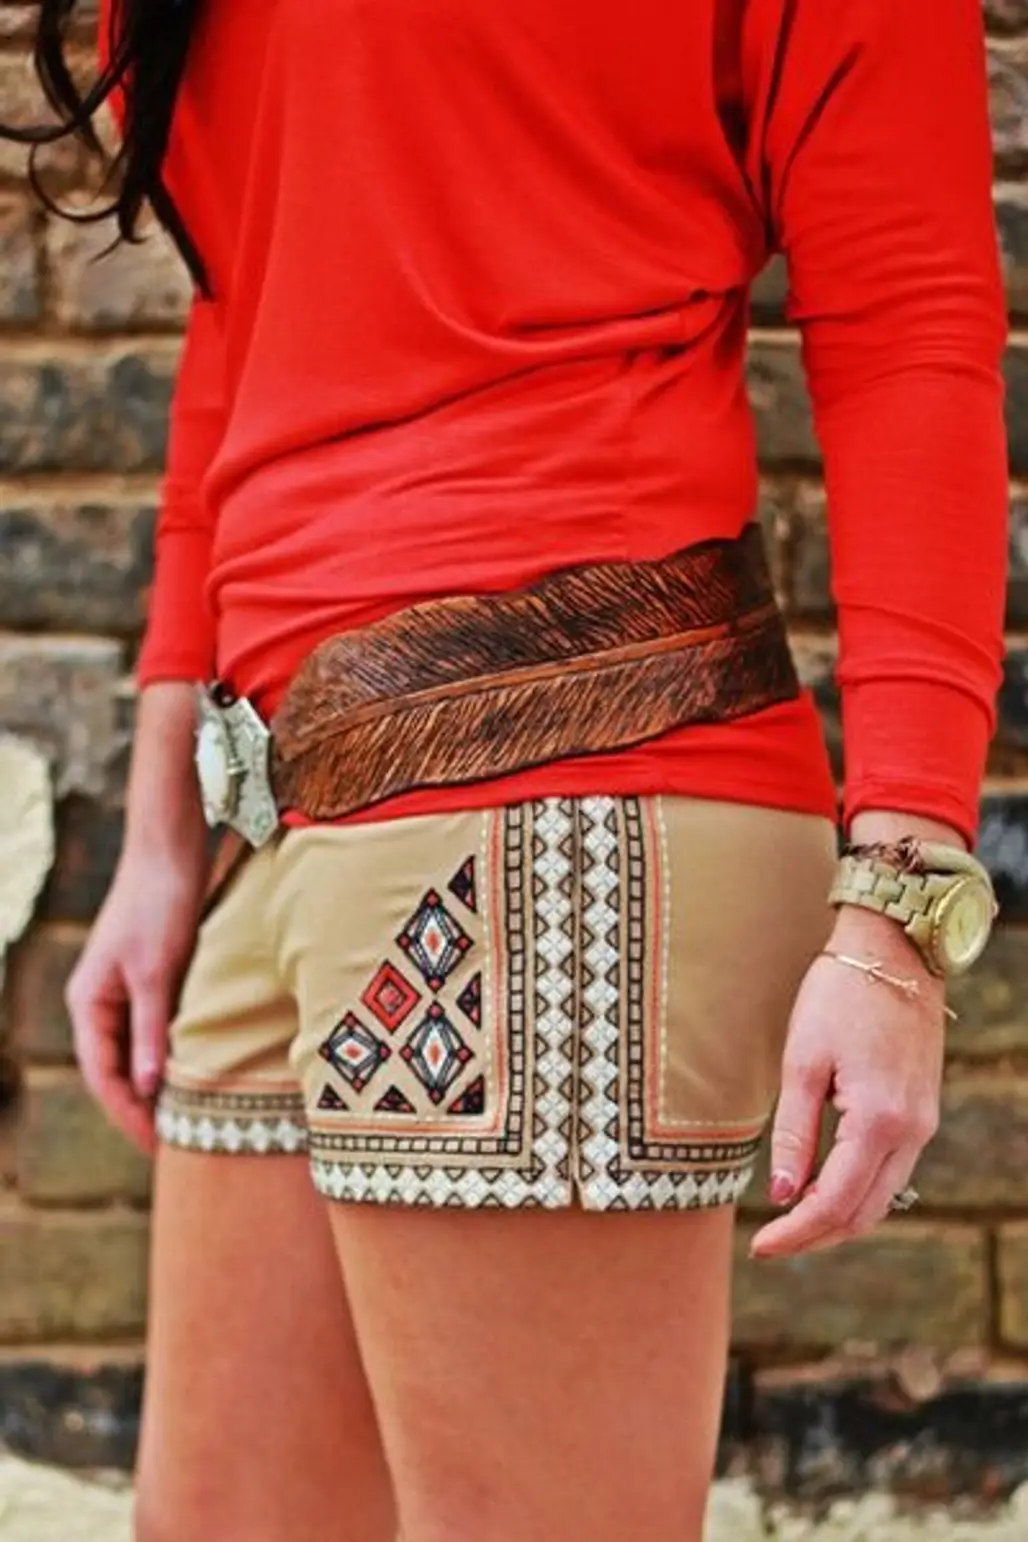 Wear a Leather Feather Belt to Cinch Your Waist